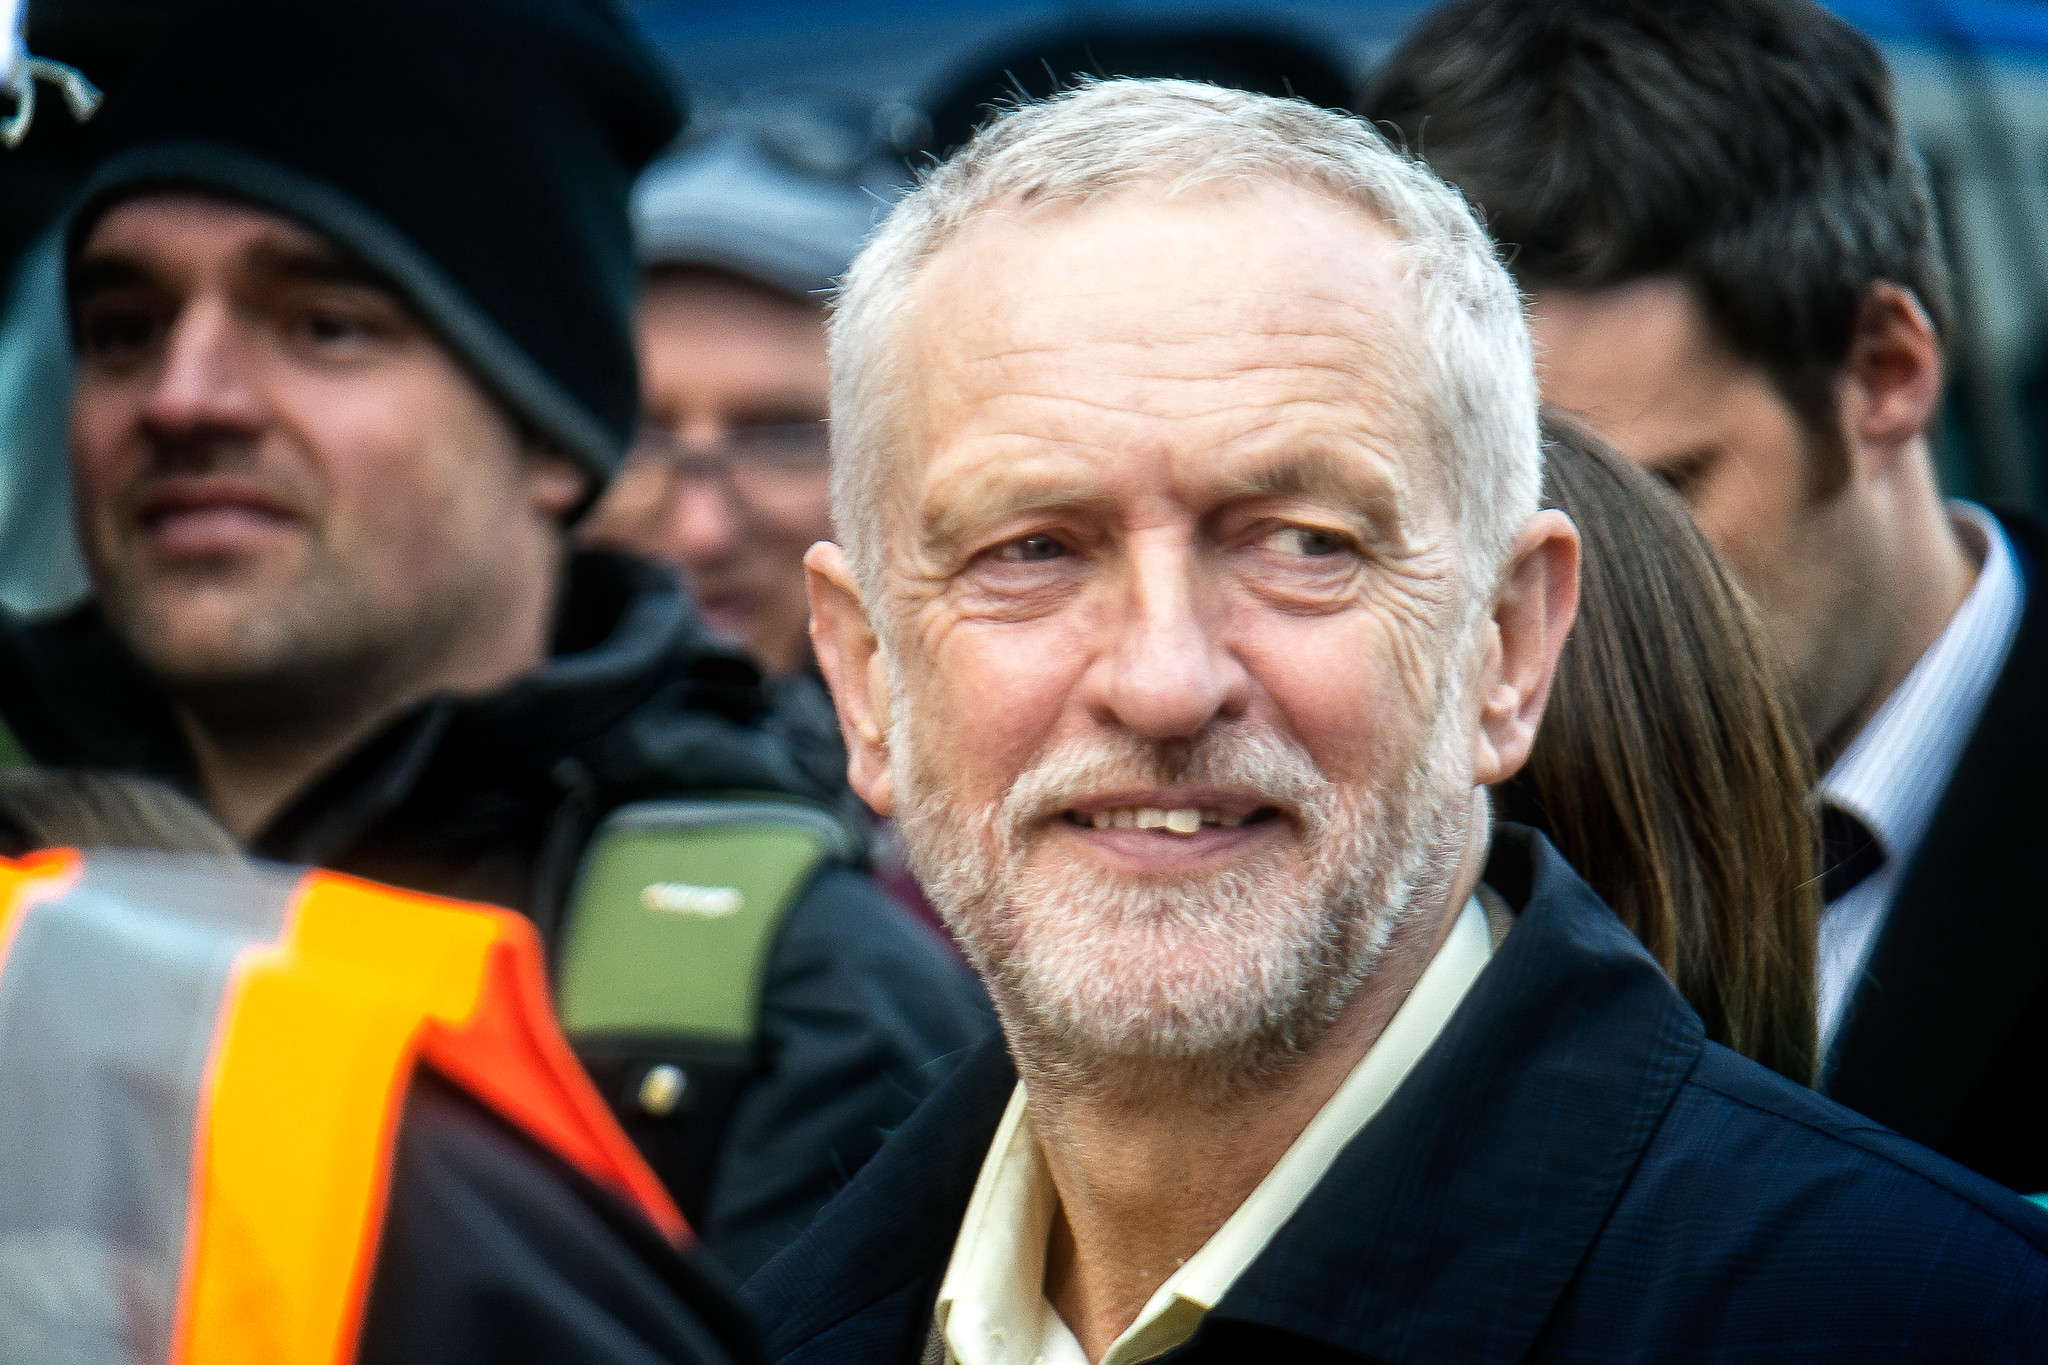 Hurt and hope: For left-wing British Jews, UK election is a moment of reckoning